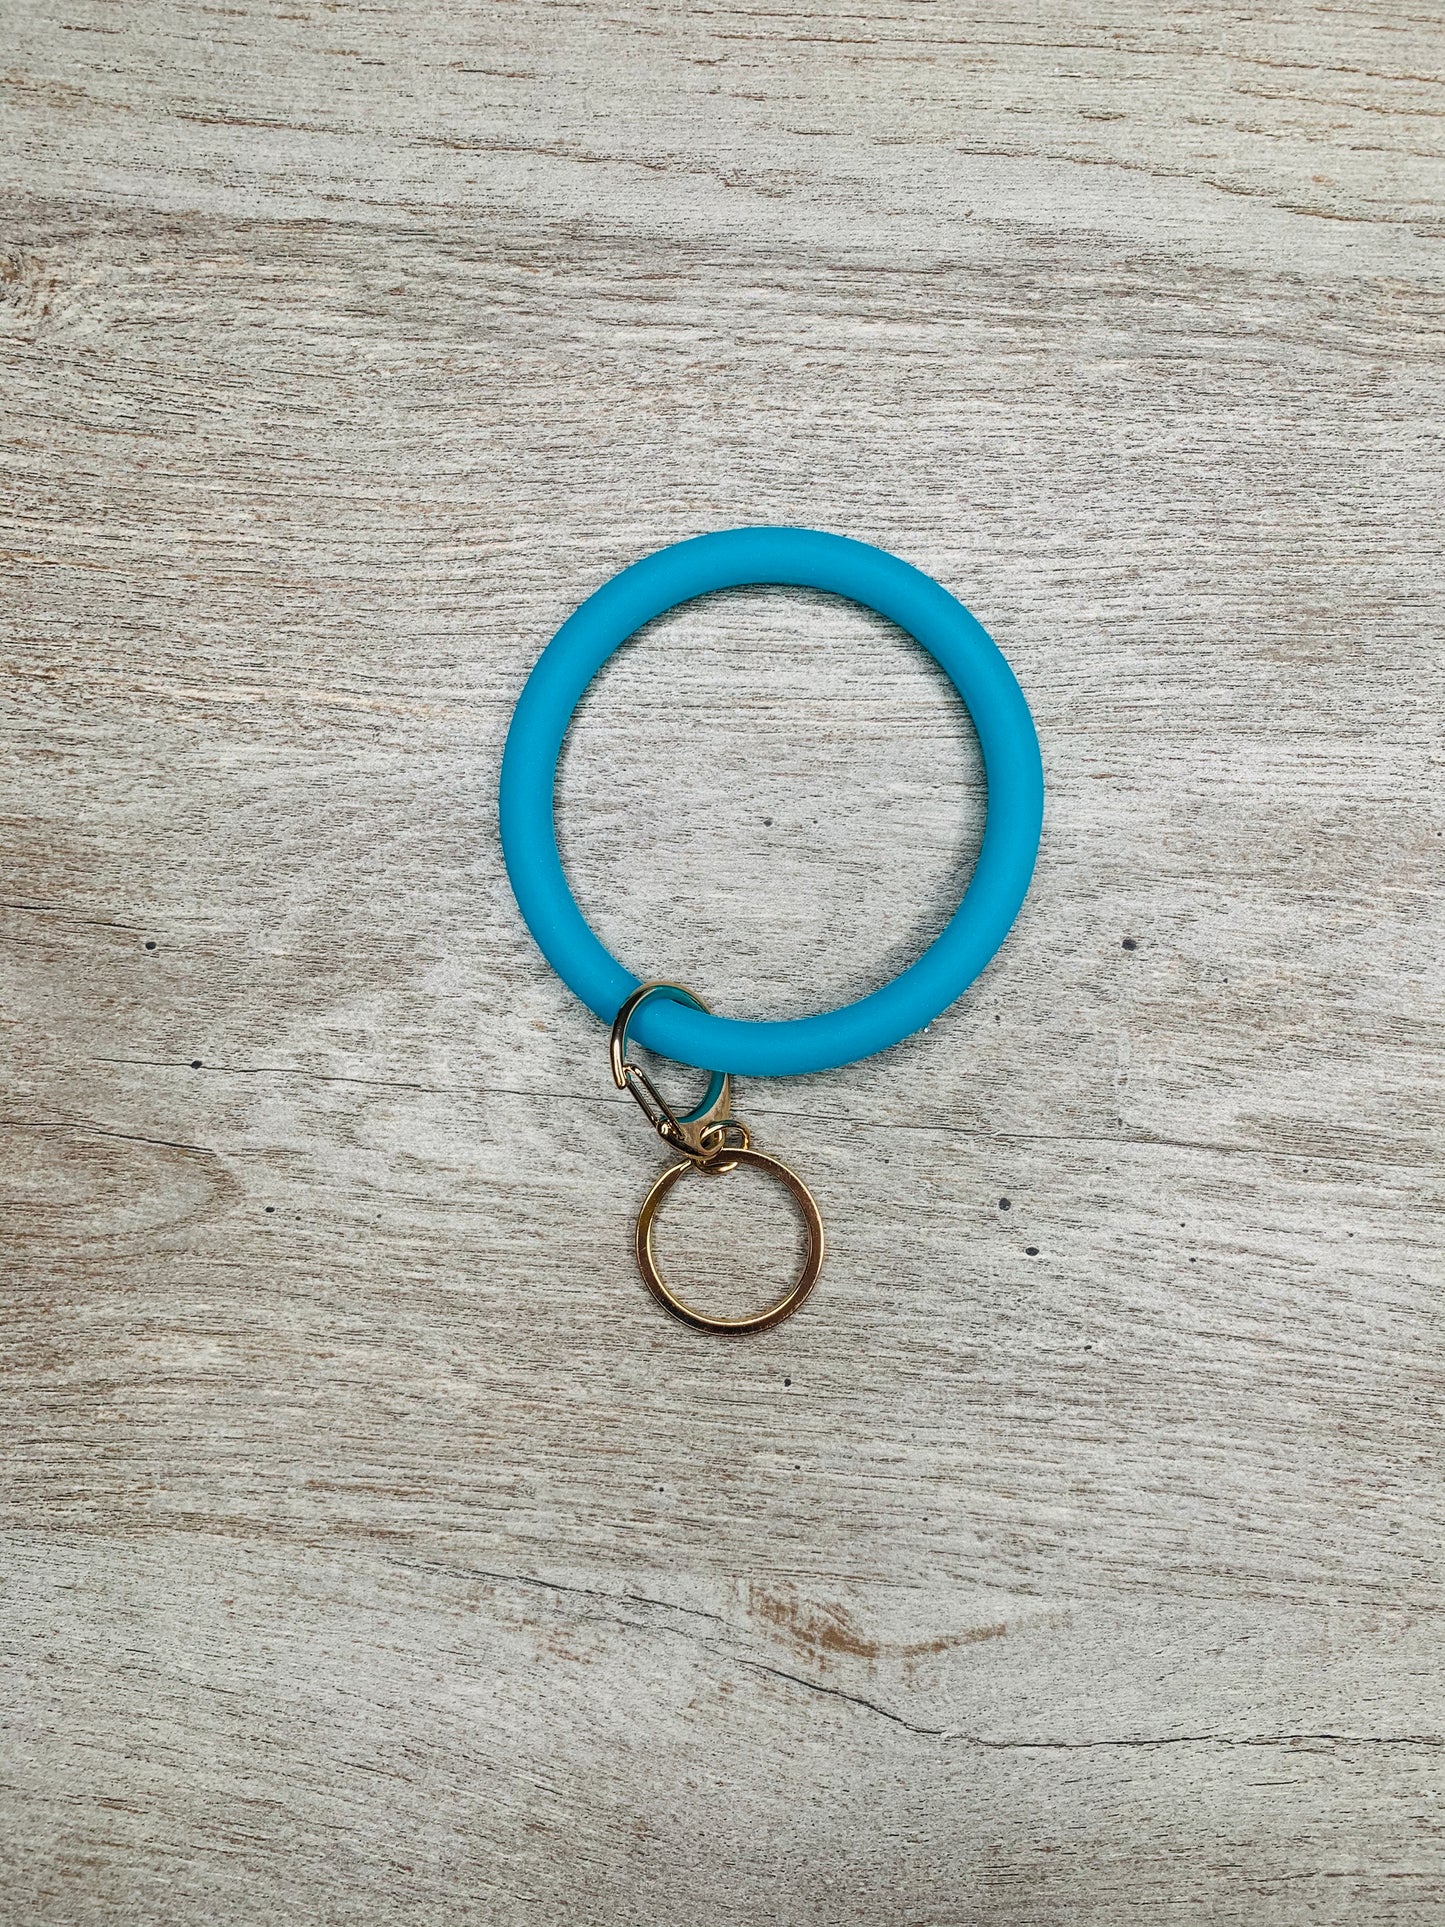 Rubber Key Rings {Multiple Colors Available}